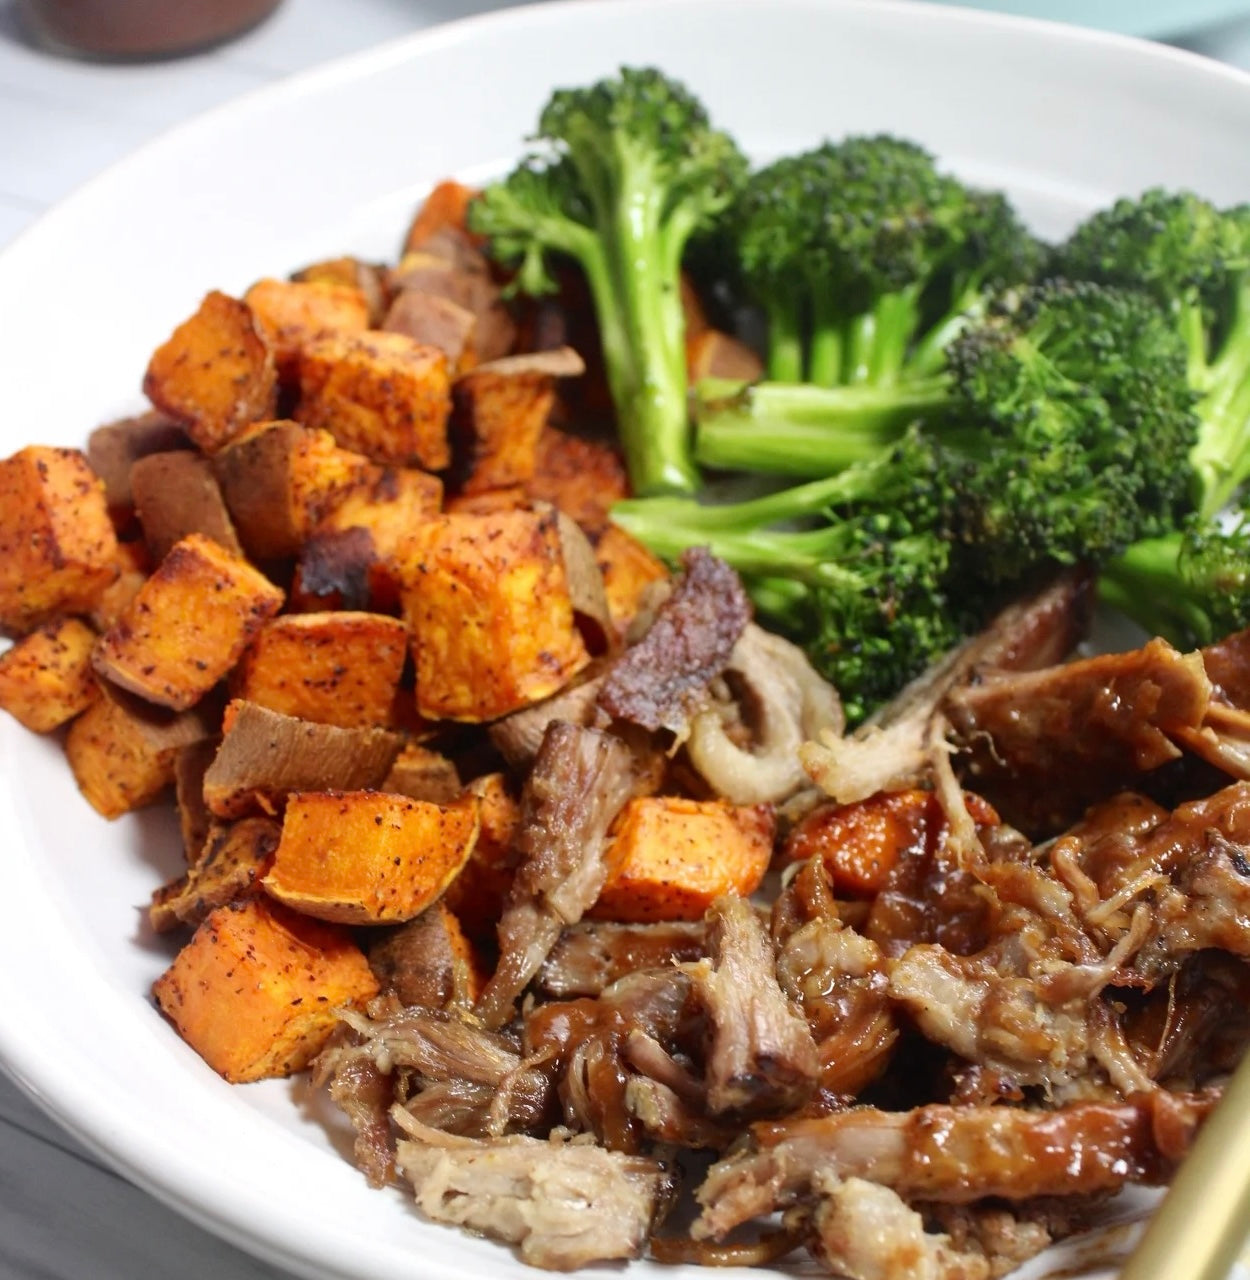 BBQ Pulled Pork Meal with Roasted Sweet Potato and Broccoli